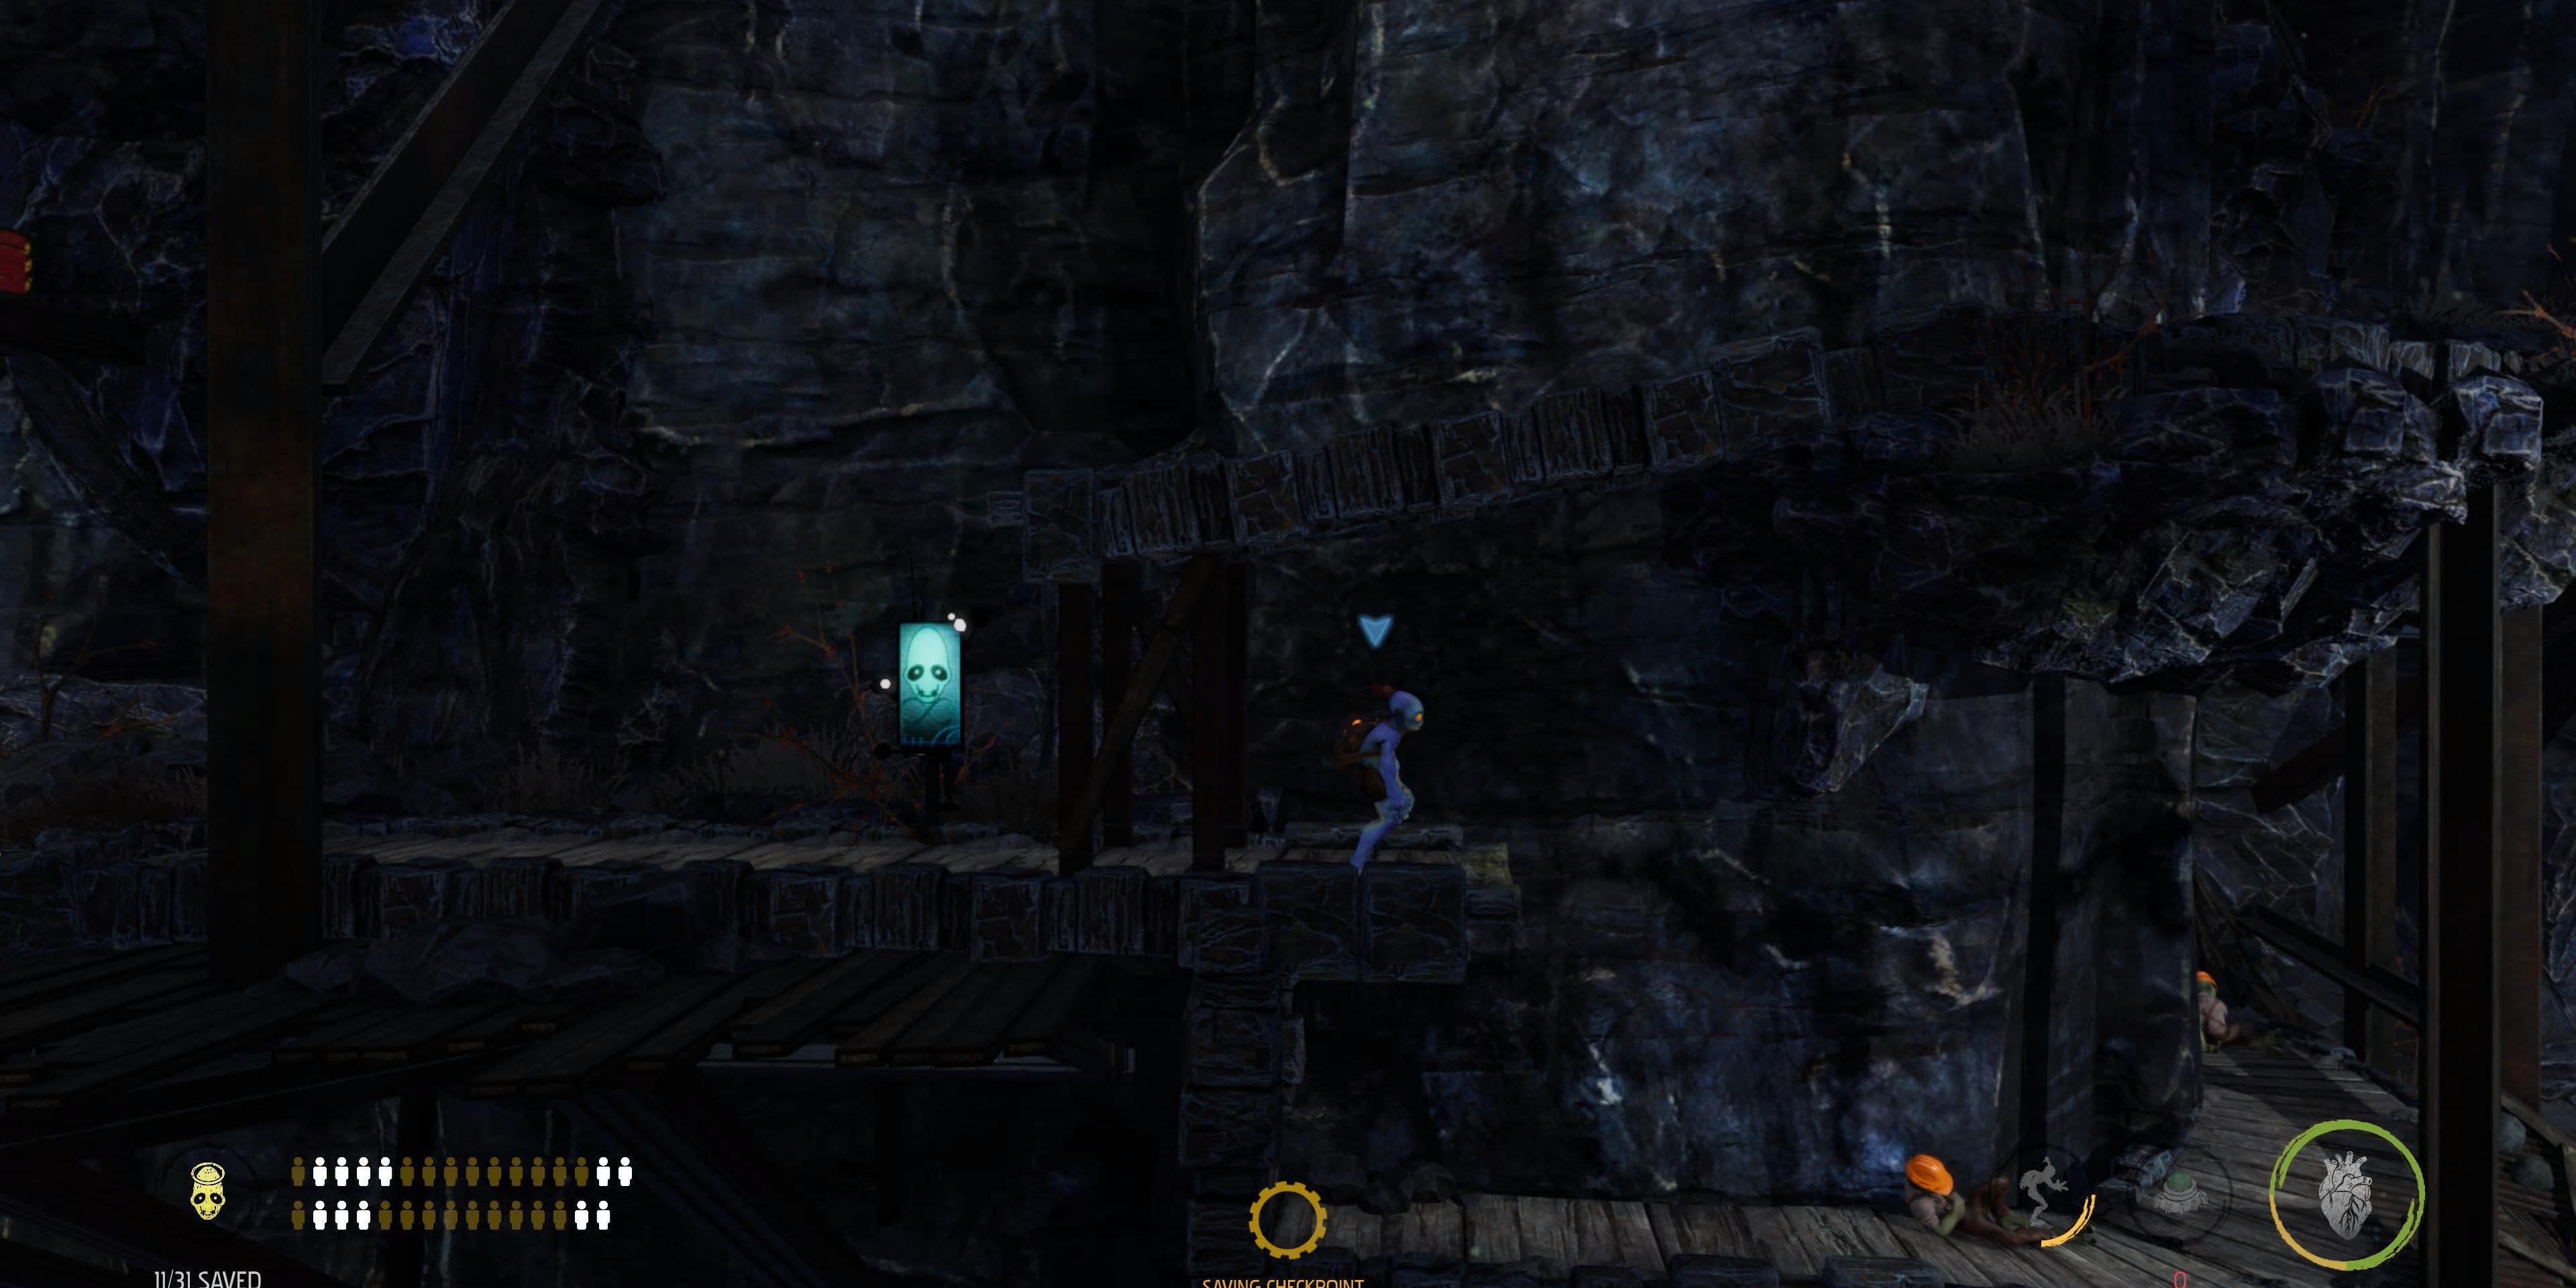 Abe looking for Mudokons in Oddworld Soulstorm